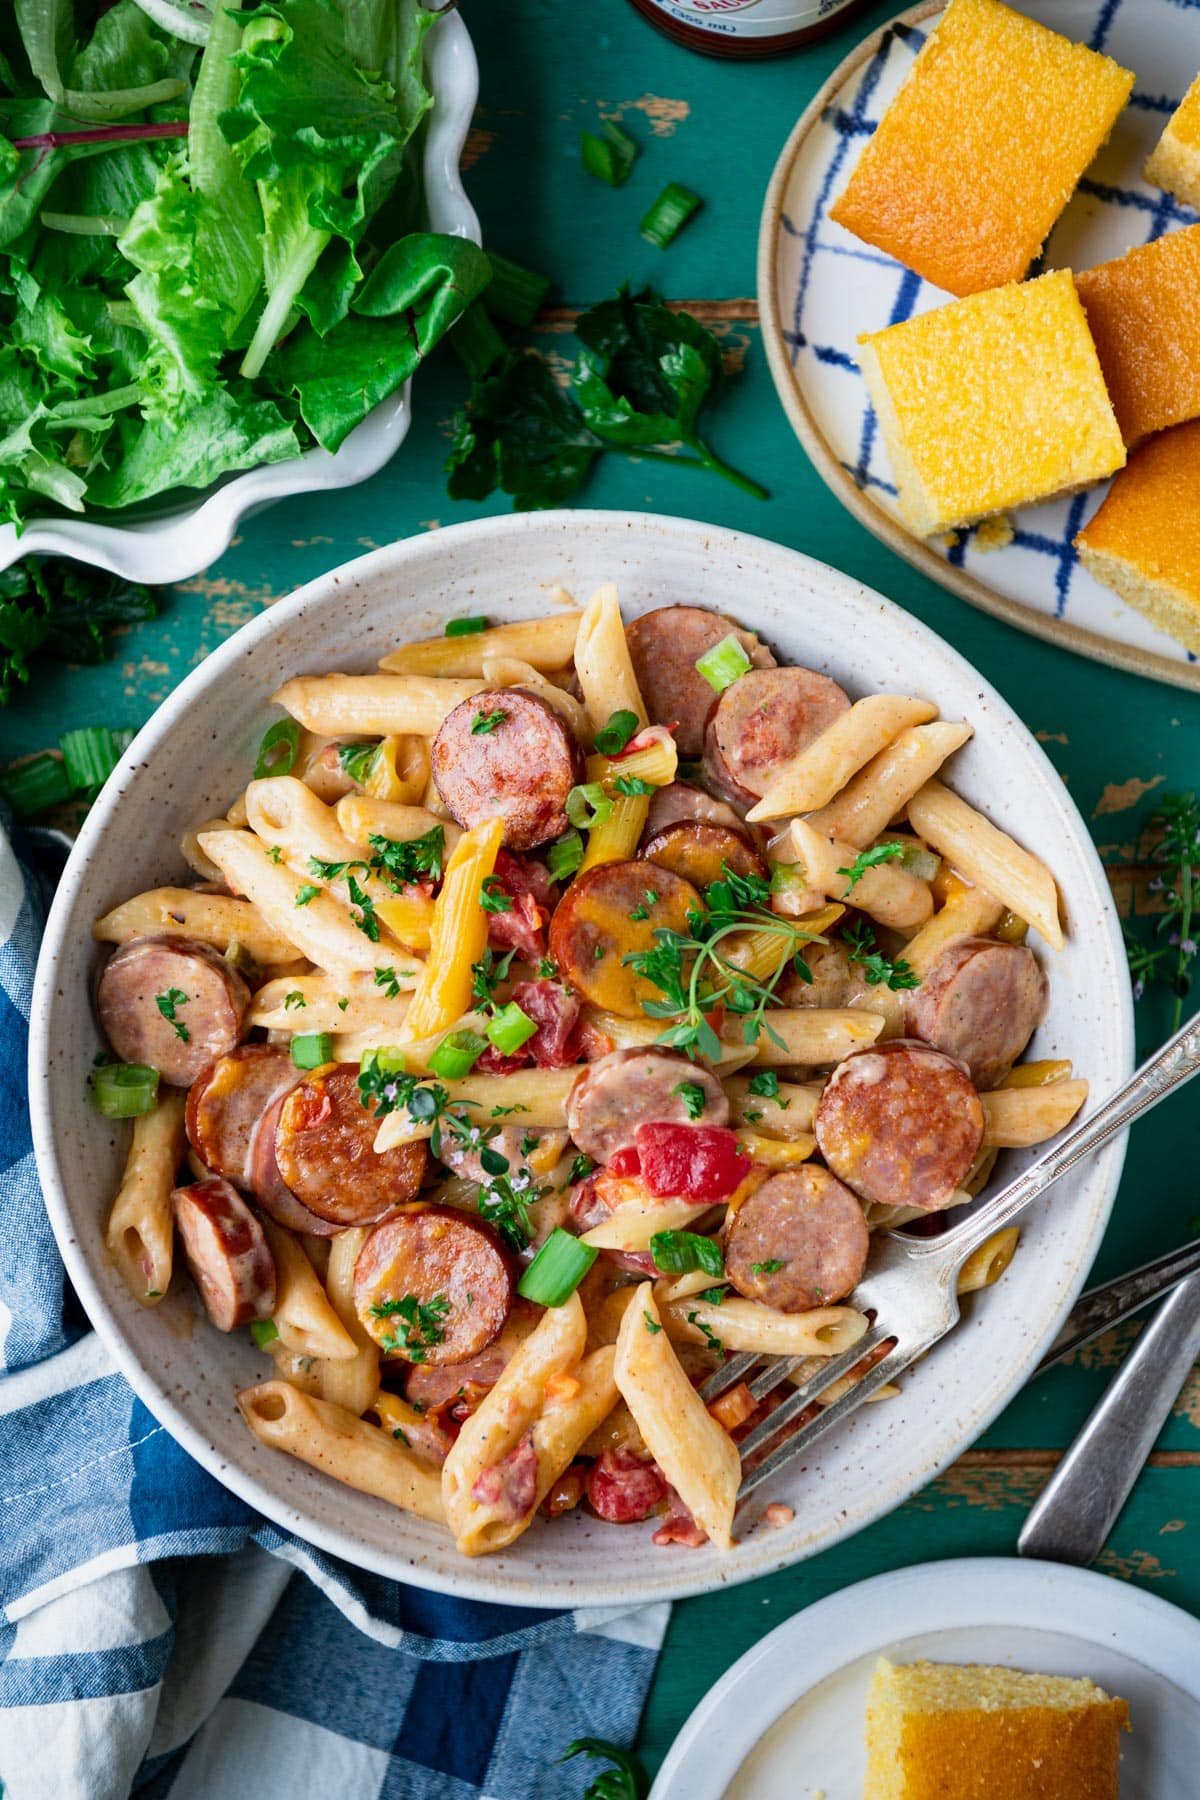 Overhead shot of a bowl of cajun sausage pasta on a turquoise table.